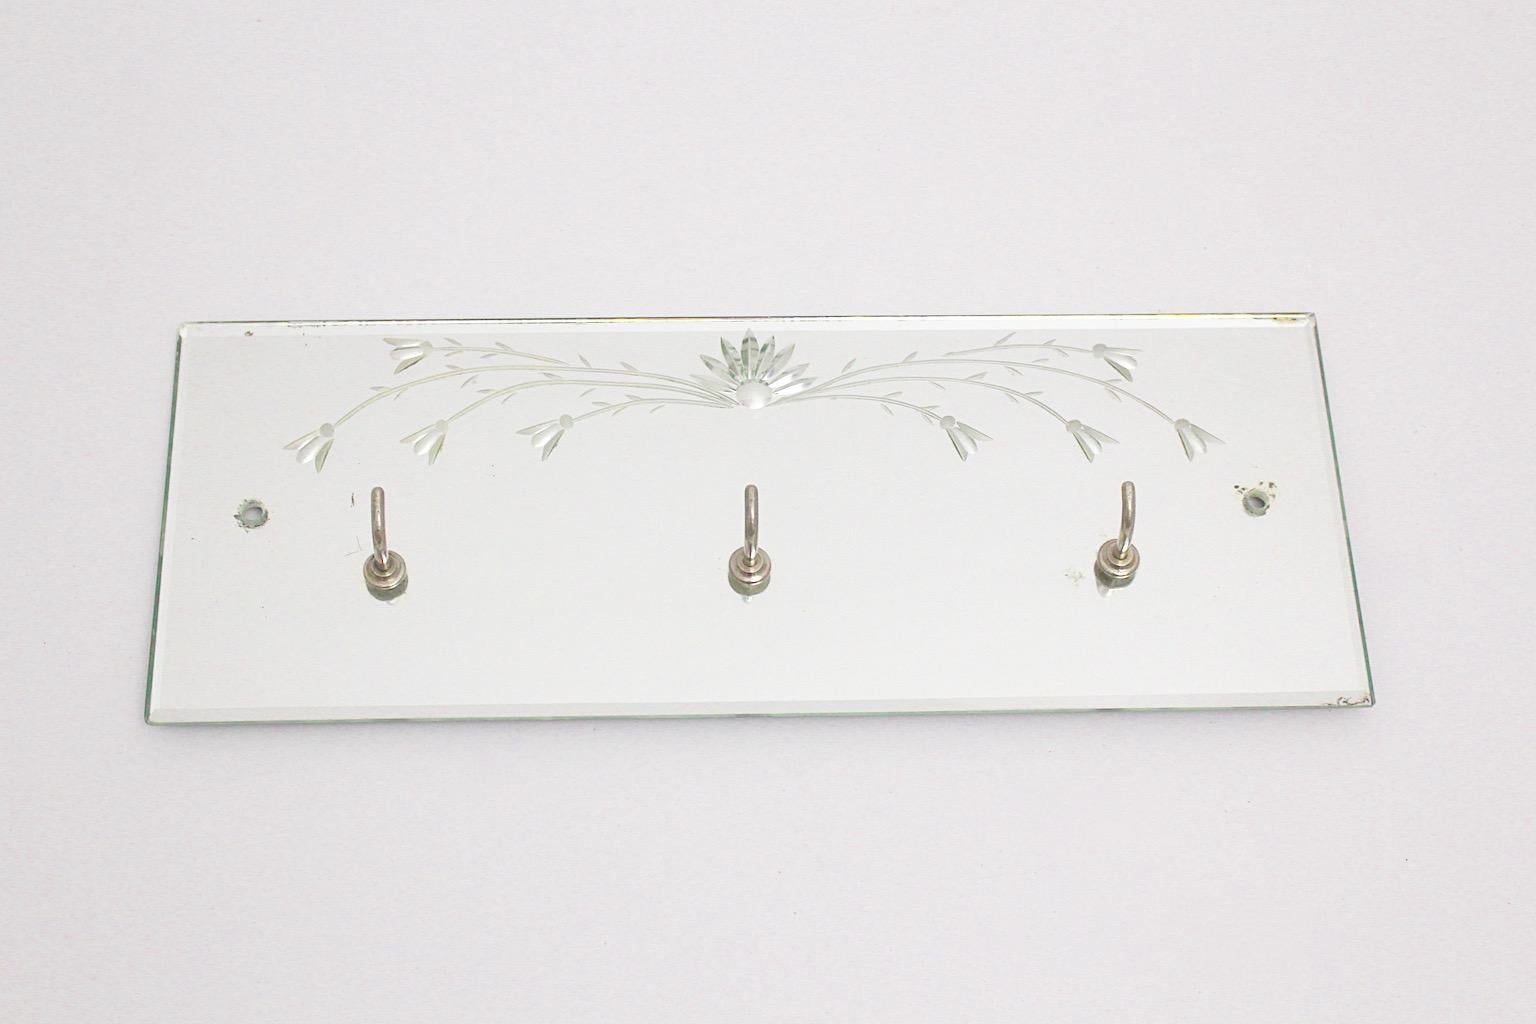 Mid-Century Modern vintage coat rack from mirror glass with etched flowers 1950s Italy.
An amazing board or rack from mirror with etched flower design and three metal hooks for towels, keys or coats. 
This mirror glass rack shows good condition with